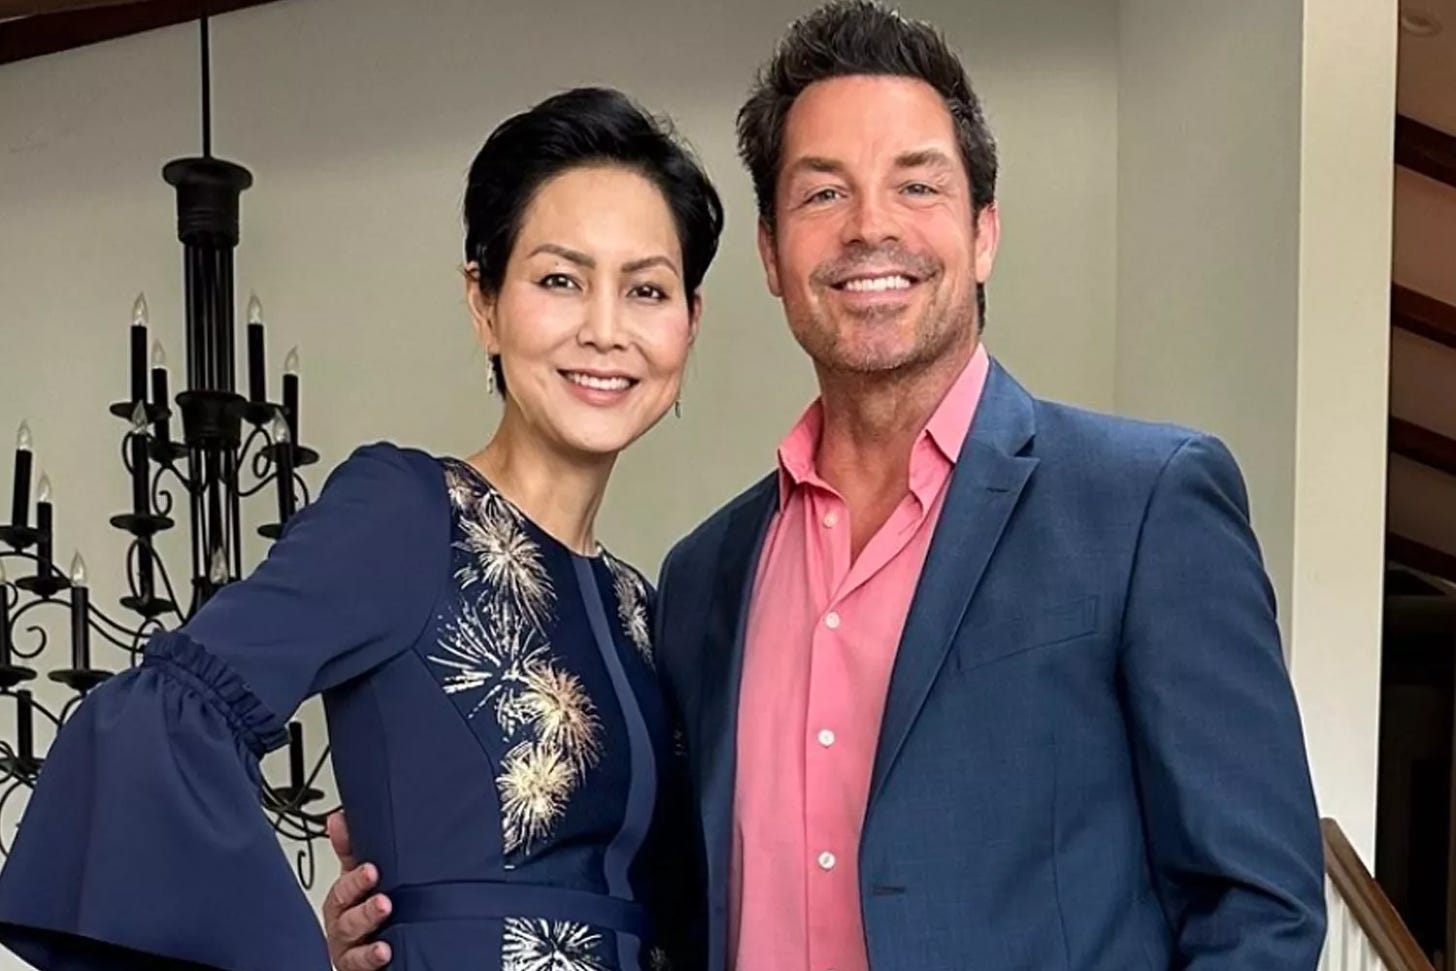 Brennan Elliott poses wearing a blue suit and pink shirt with his wife Camilla Row, wearing a dark blue dress with gold stars